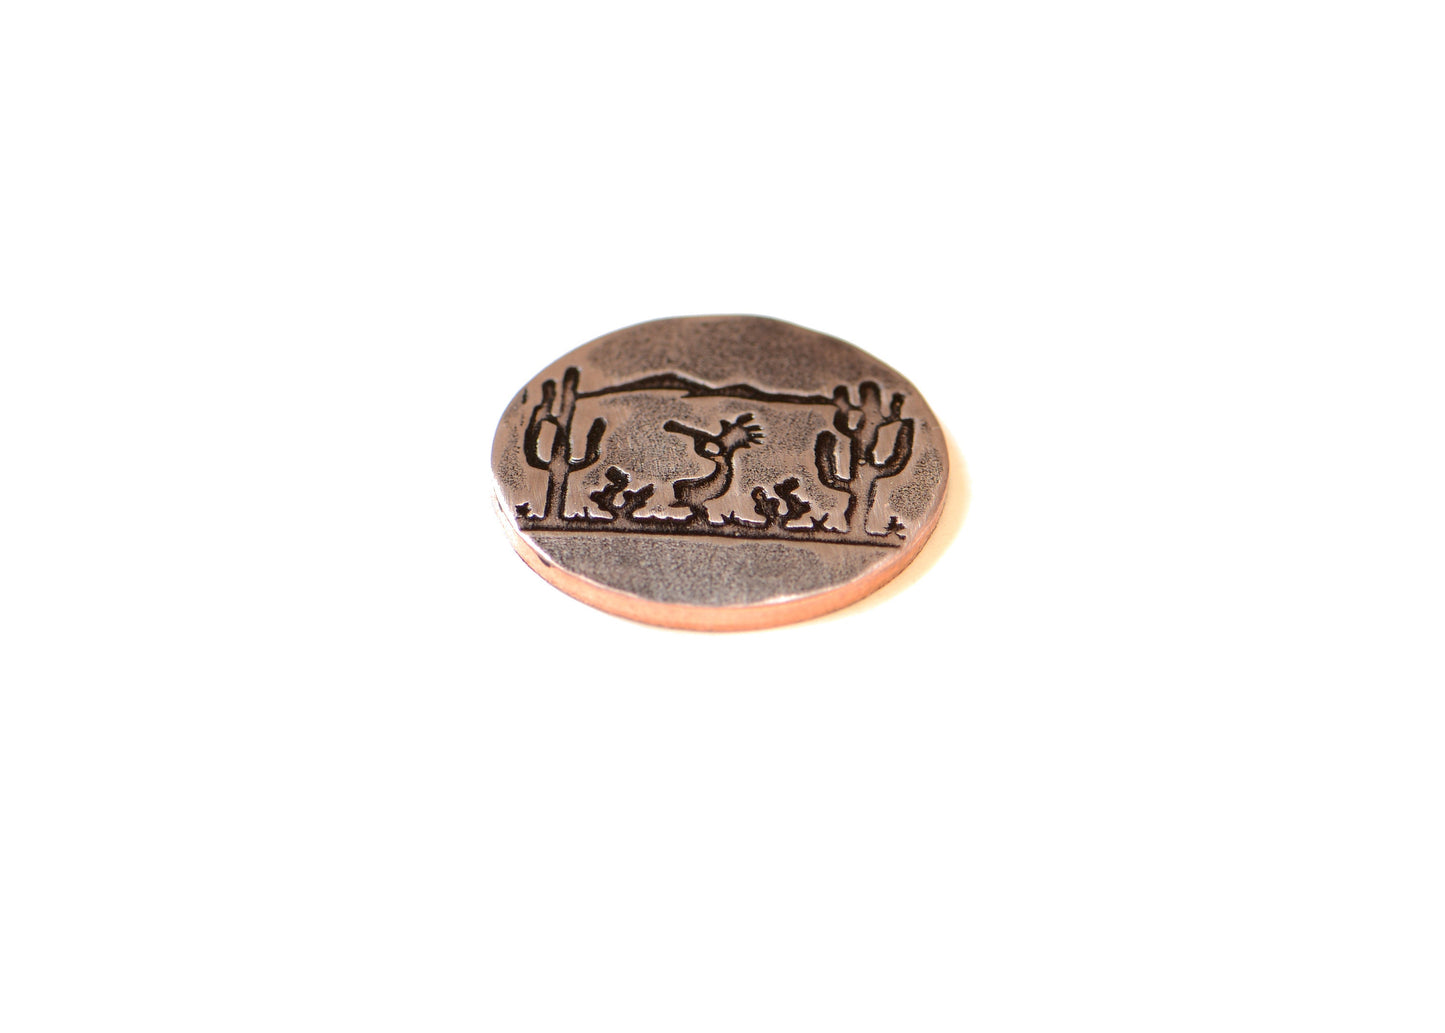 Golf ball marker with saguaro cacti and Kokopelli on copper